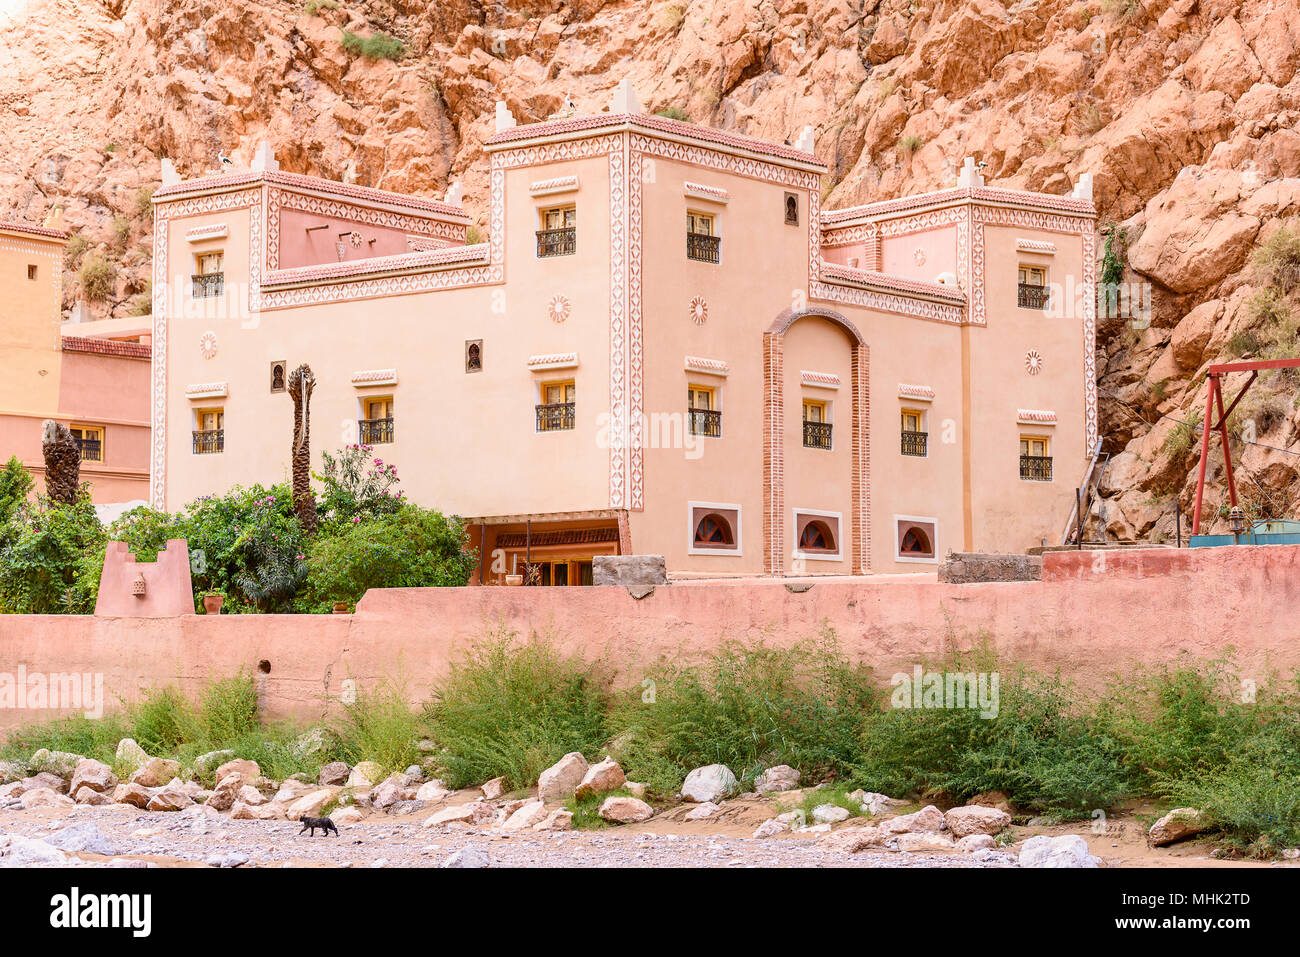 Hotel in the Todgha Gorge, a canyon in the High Atlas Mountains in Morocco, near the town of Tinerhir. Stock Photo